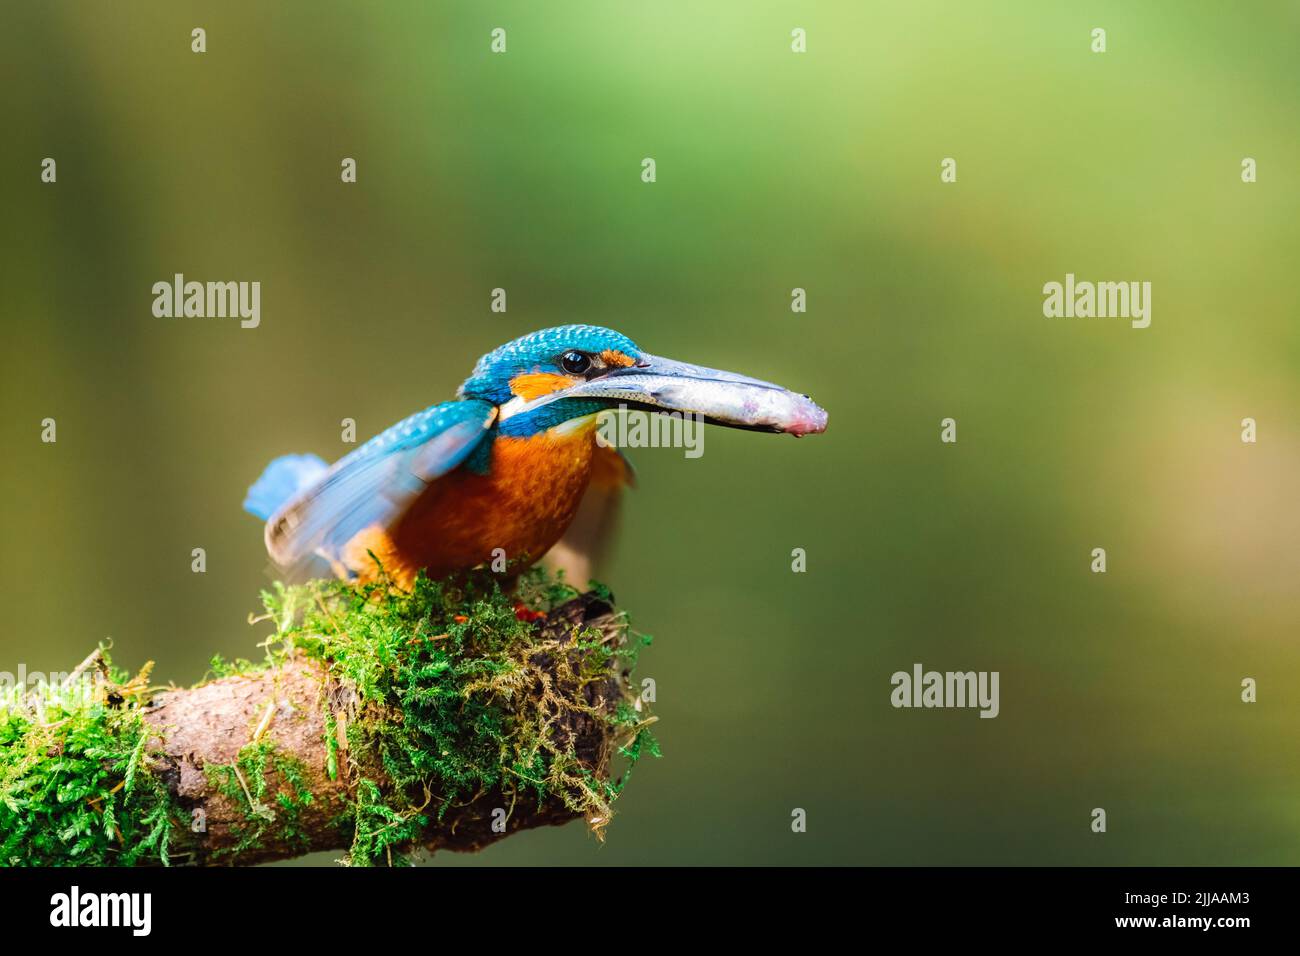 A male common kingfisher (Alcedo atthis) with a small fish in its beak perching on a stick covered in moss. Beautiful green background. Stock Photo